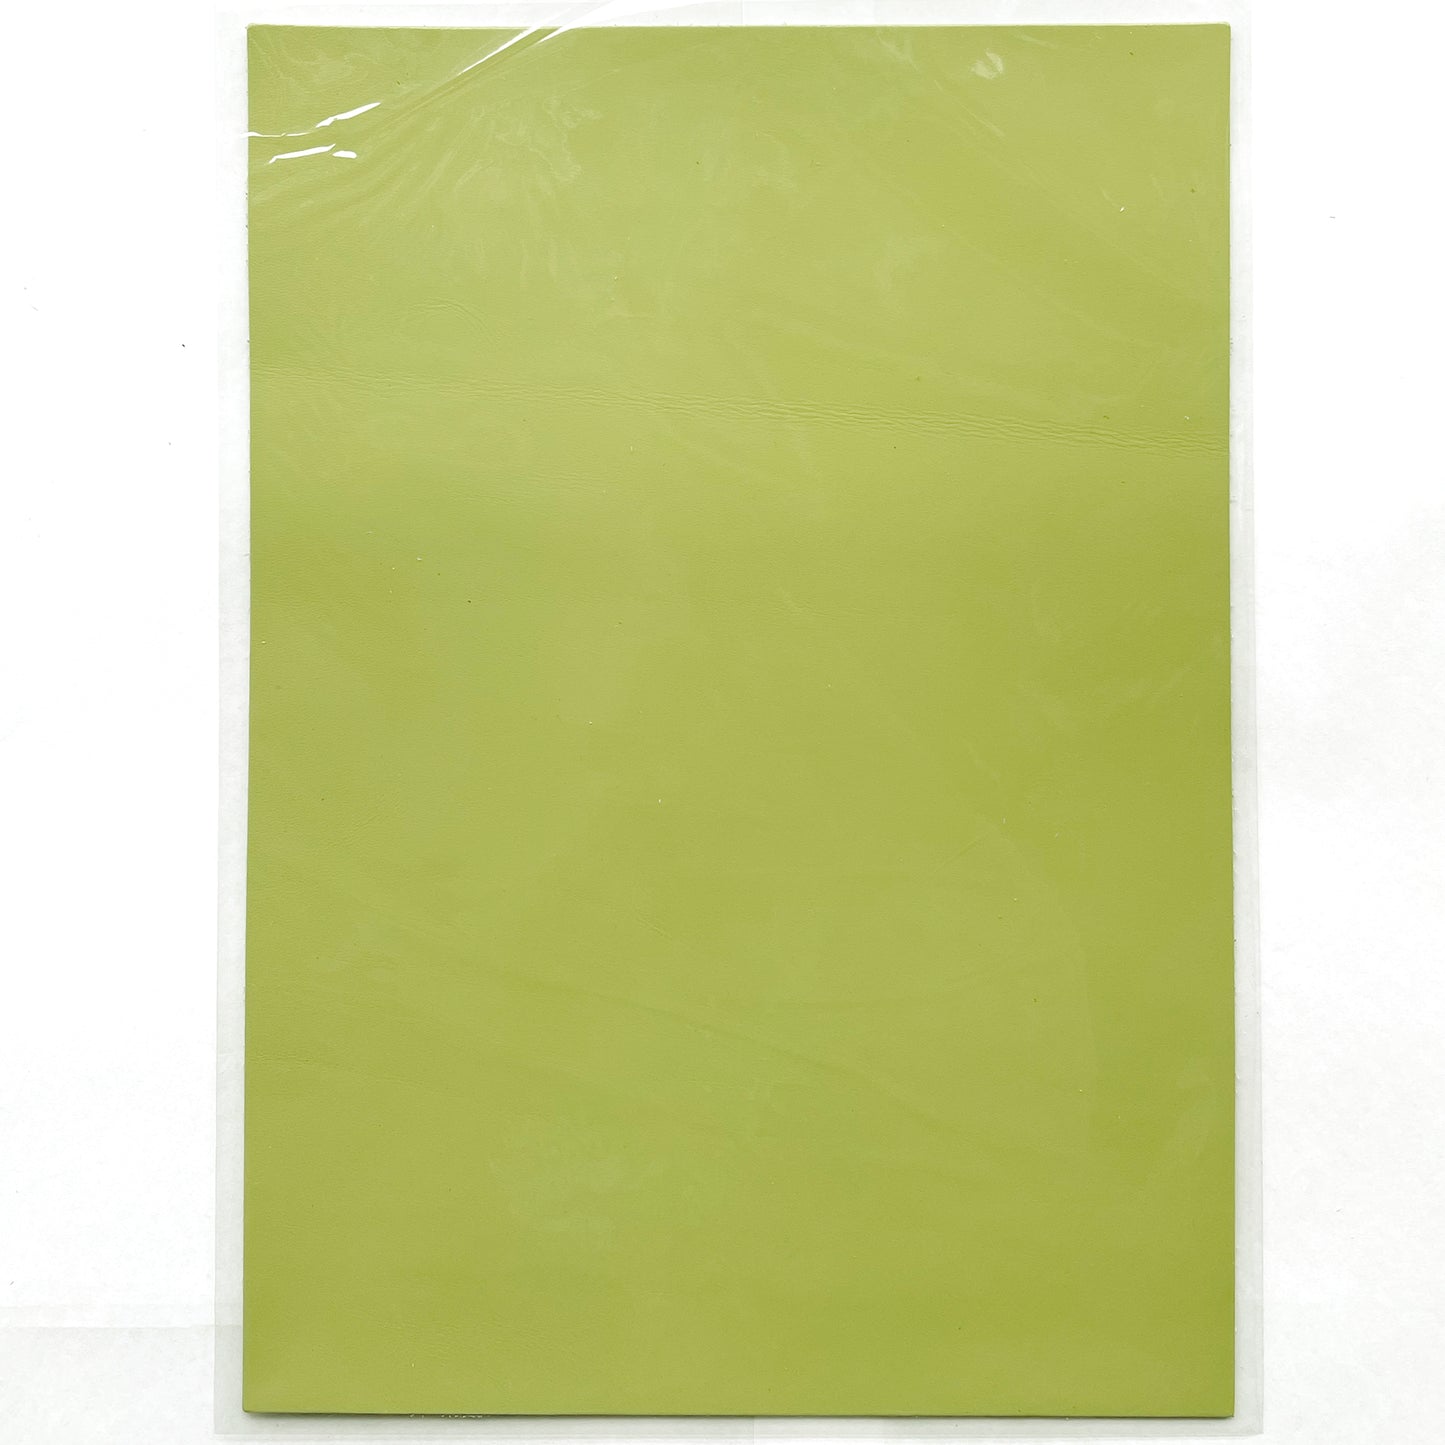 Super leather A4 #27 Yellow Green